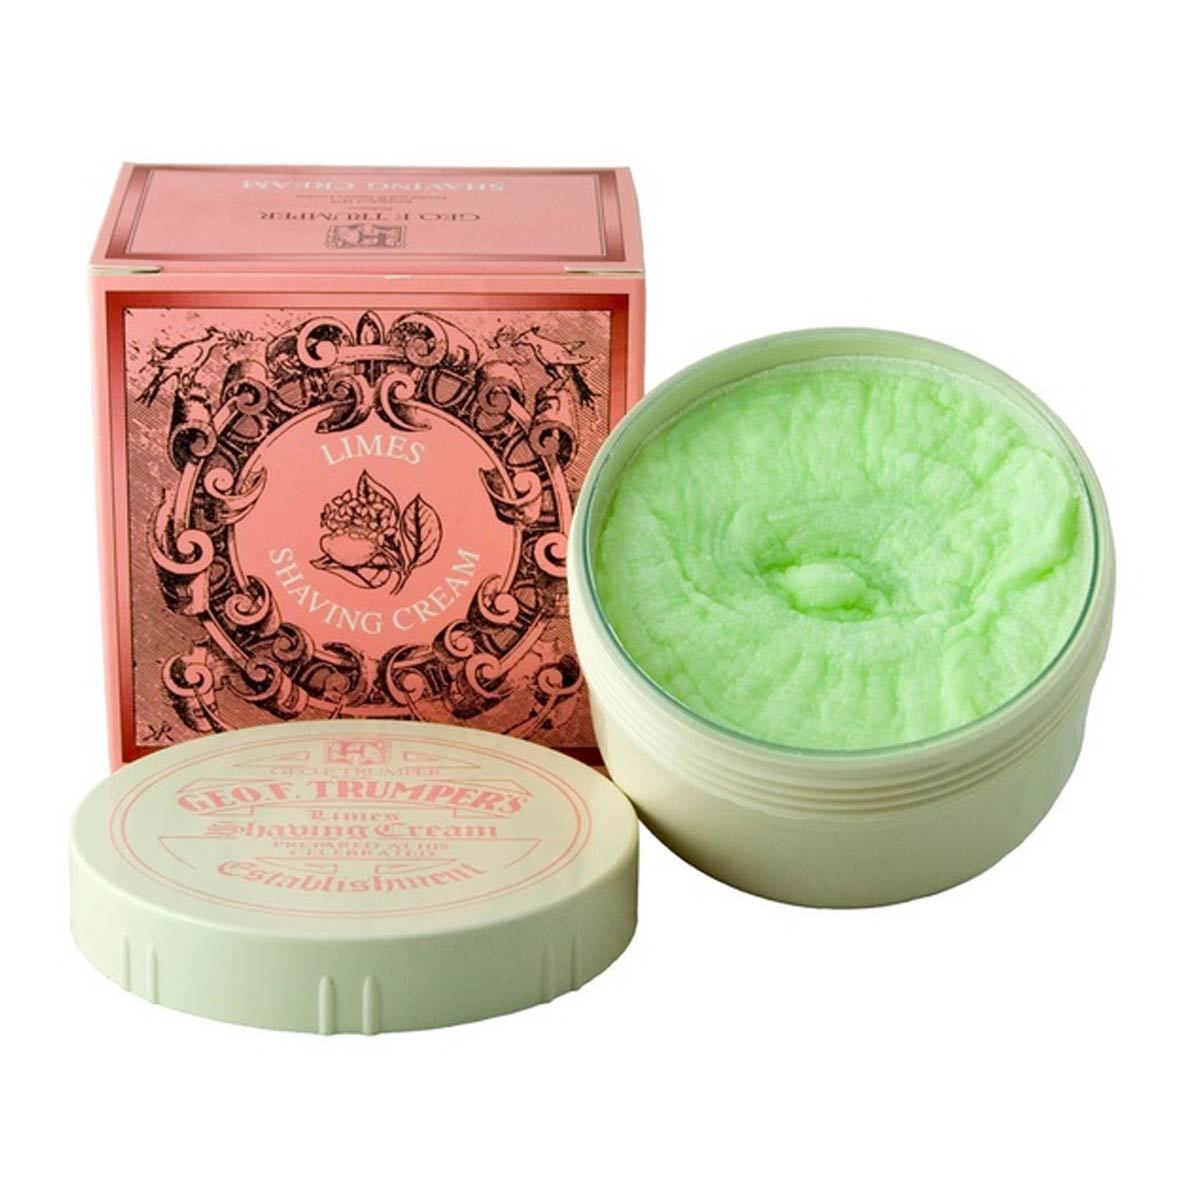 Primary image of Limes Soft Shaving Cream